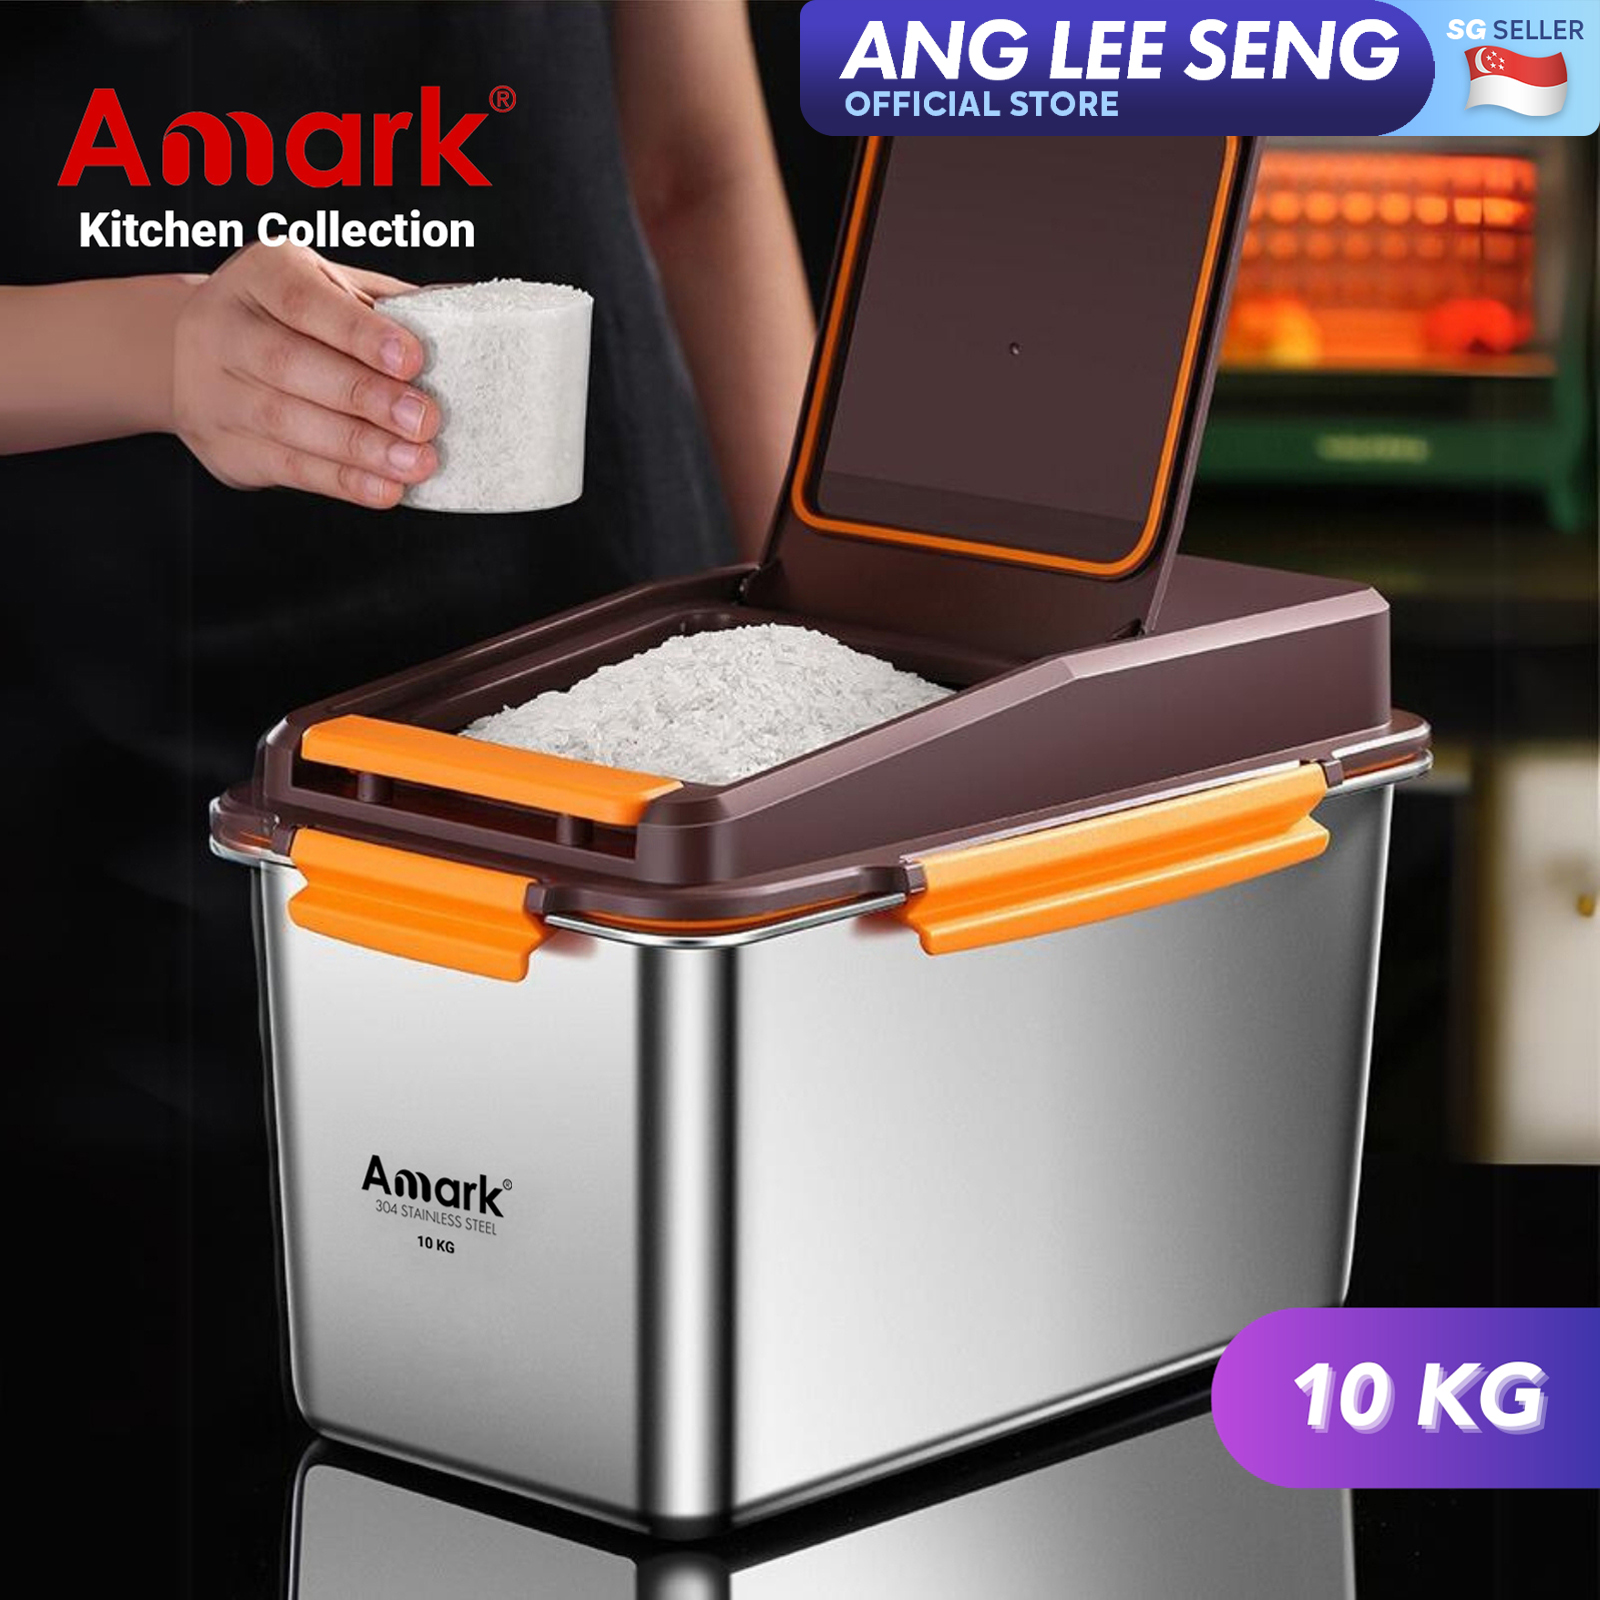 Amark Kitchen Collection Stainless Steel Rice Stocker Box 10kg - Push-Button Flip Top Lid & Measuring Cup